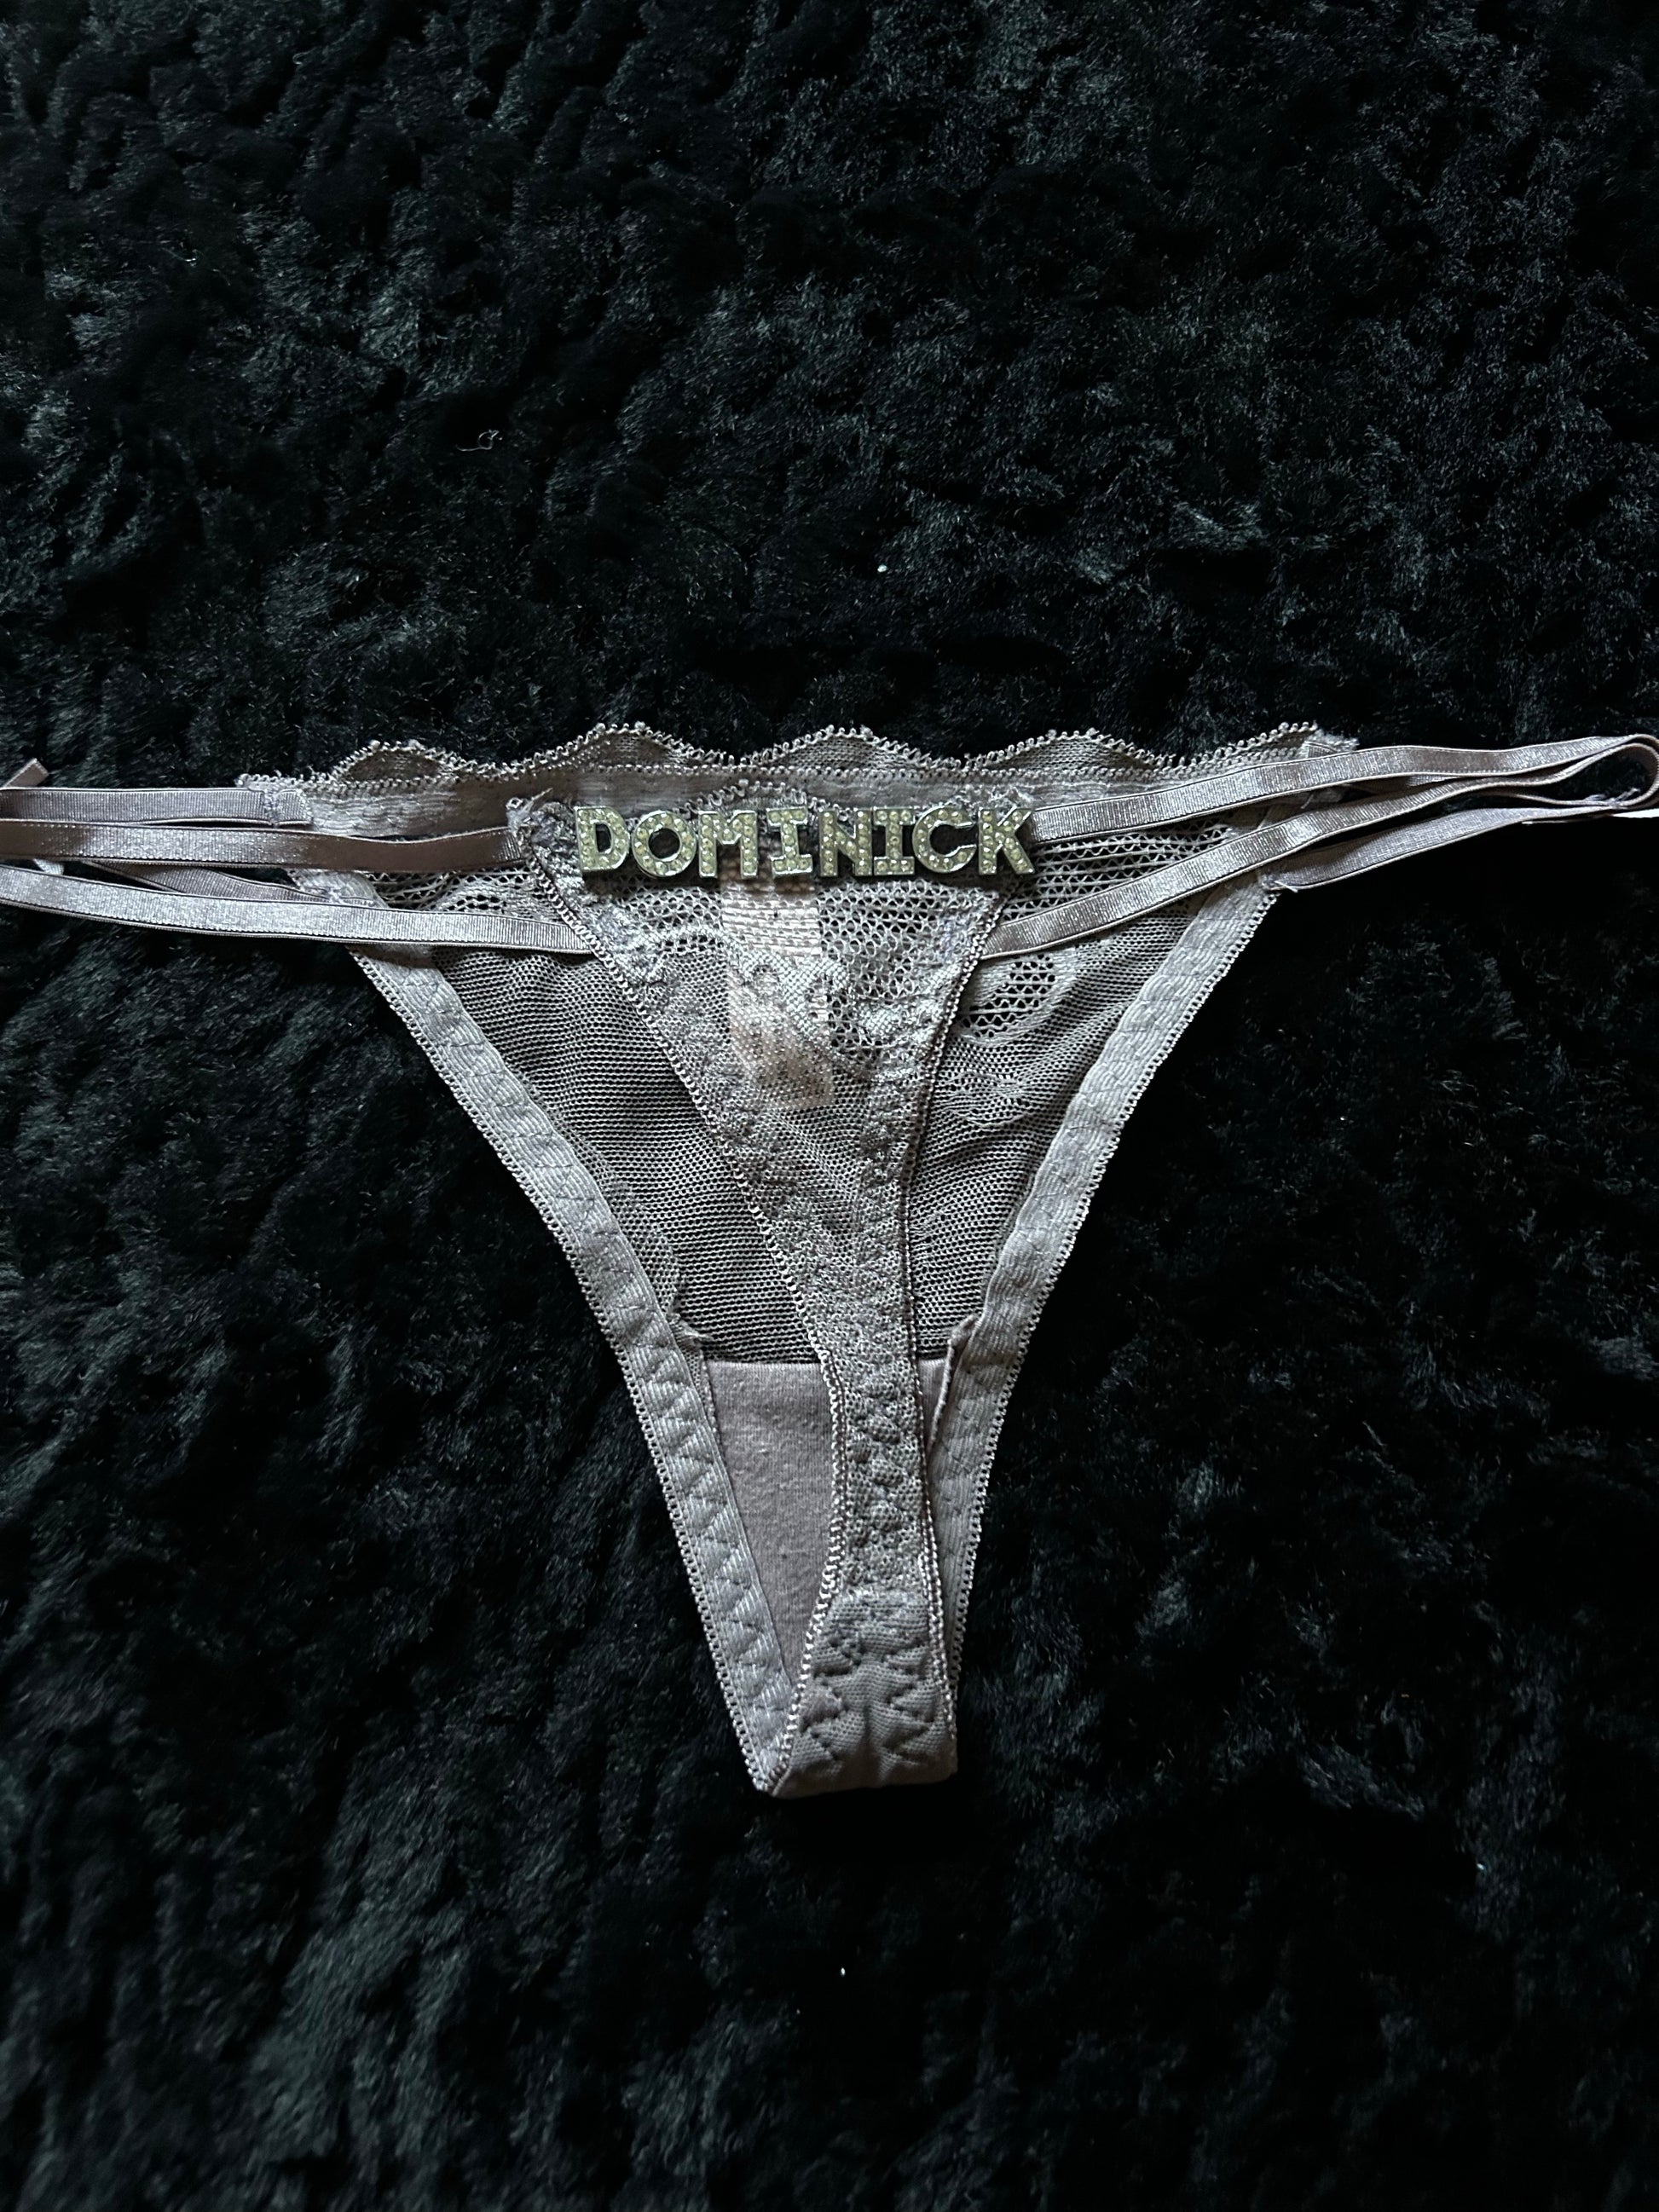 Custom Things to Do Thong Panties Personalized With Your Name Sexy